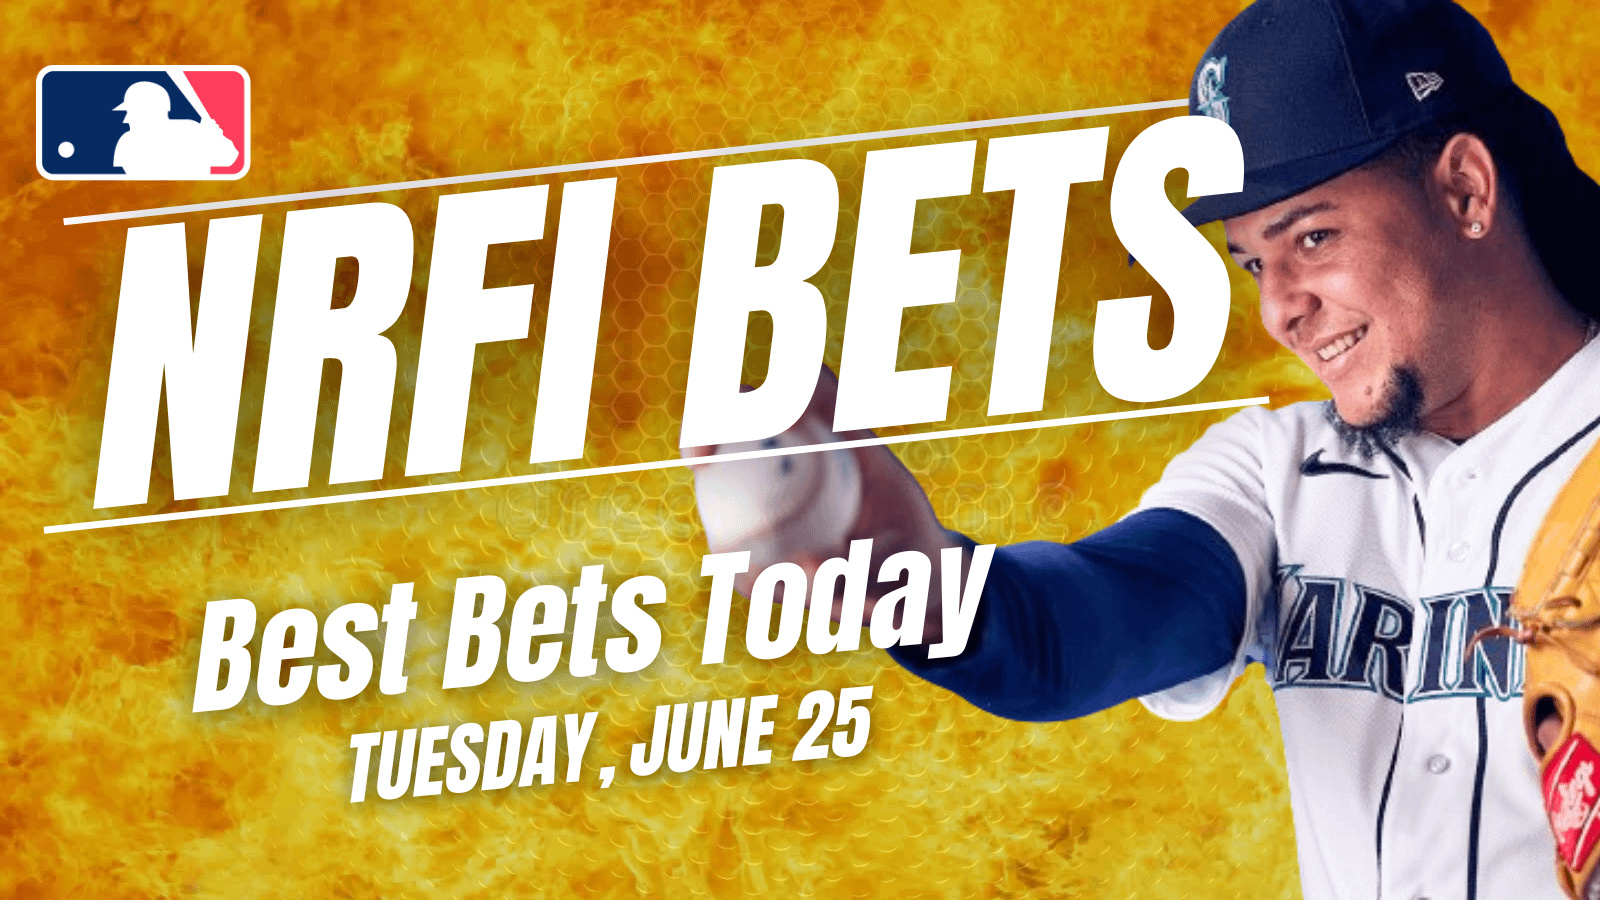 Get the best NRFI bets for today: Here are the top no run first inning picks, predictions and prop bets for Tuesday, June 25 ...